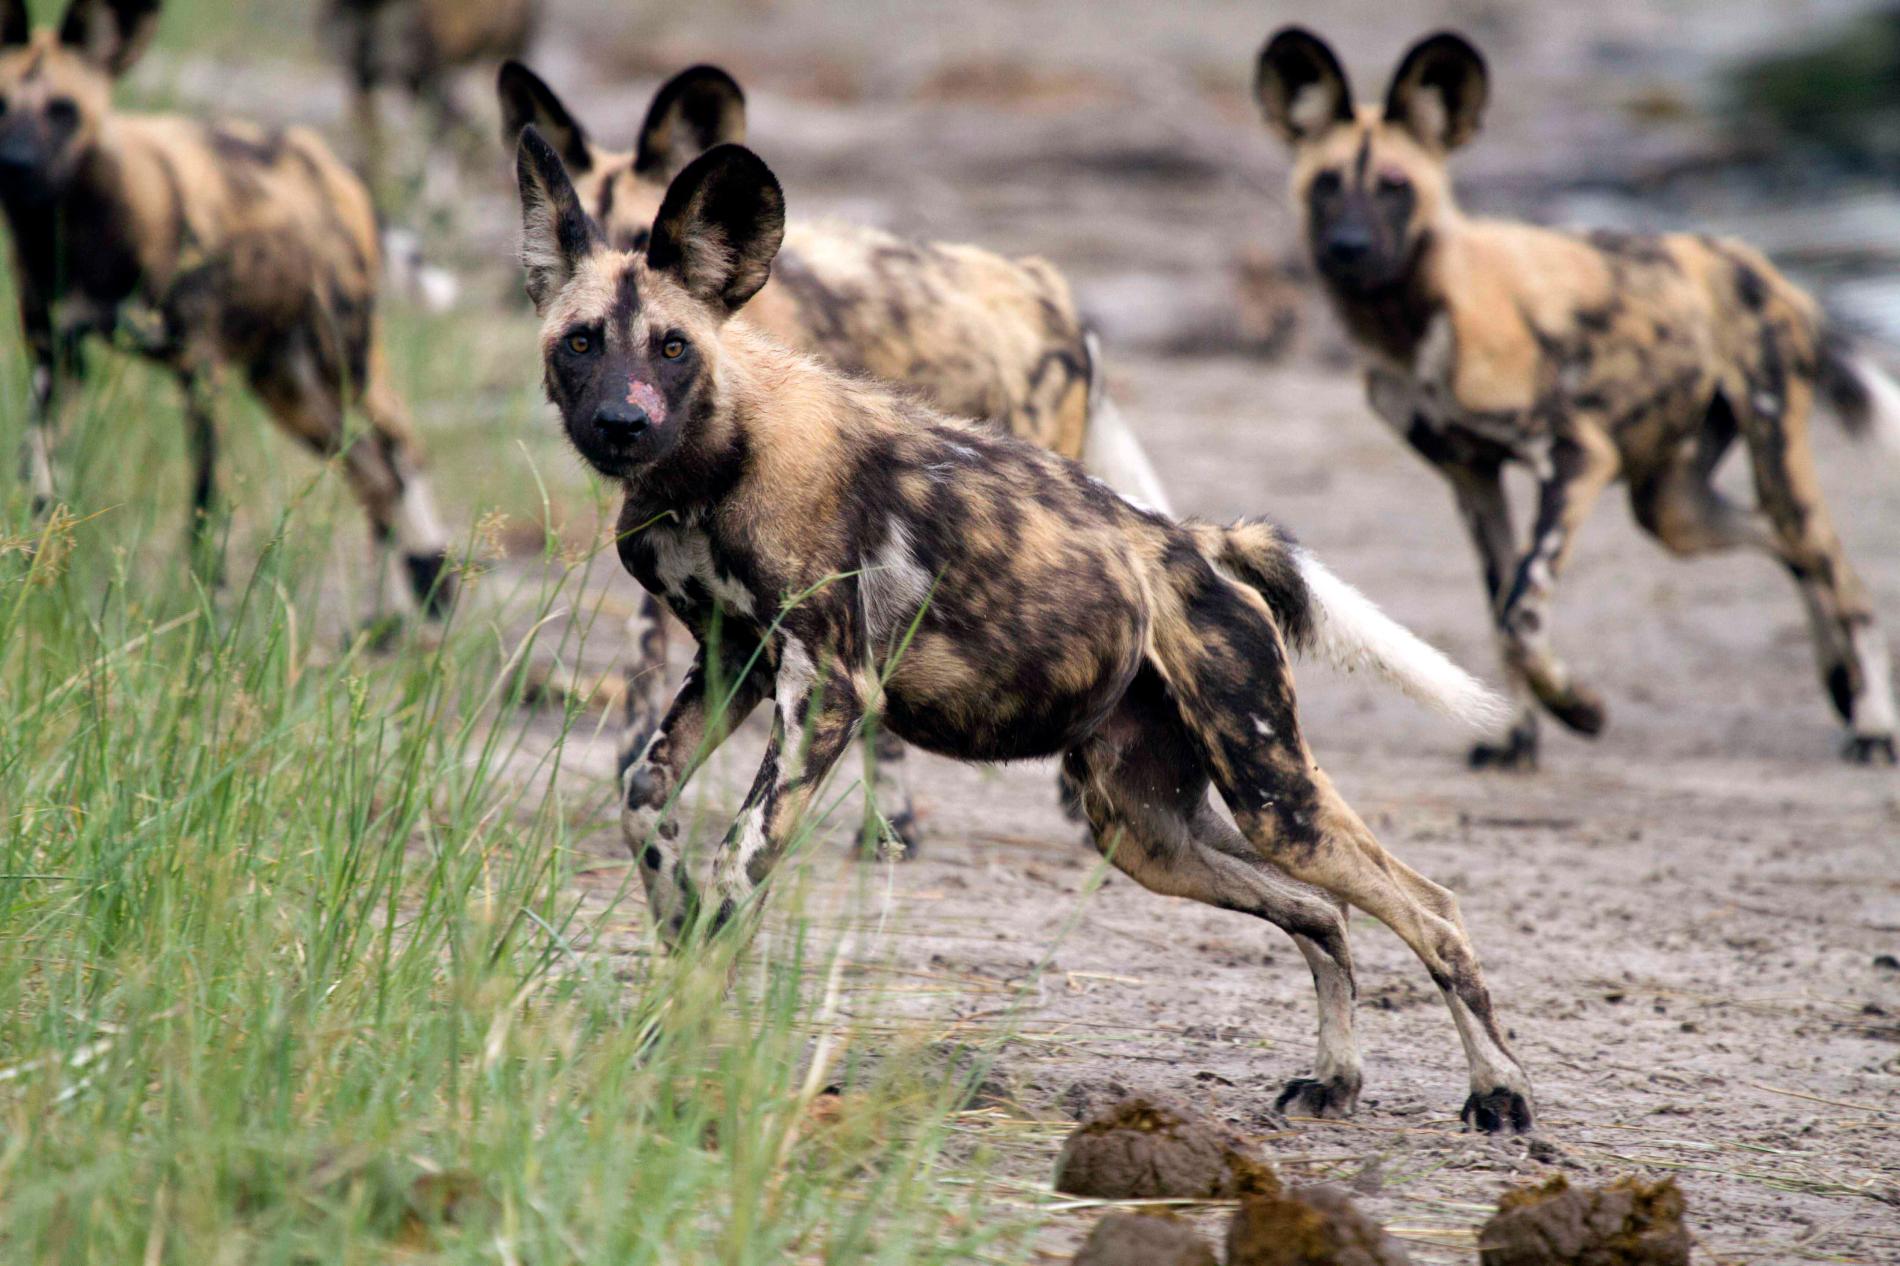 How Pet Dogs Are Helping Out Their Endangered Kin in the Wild